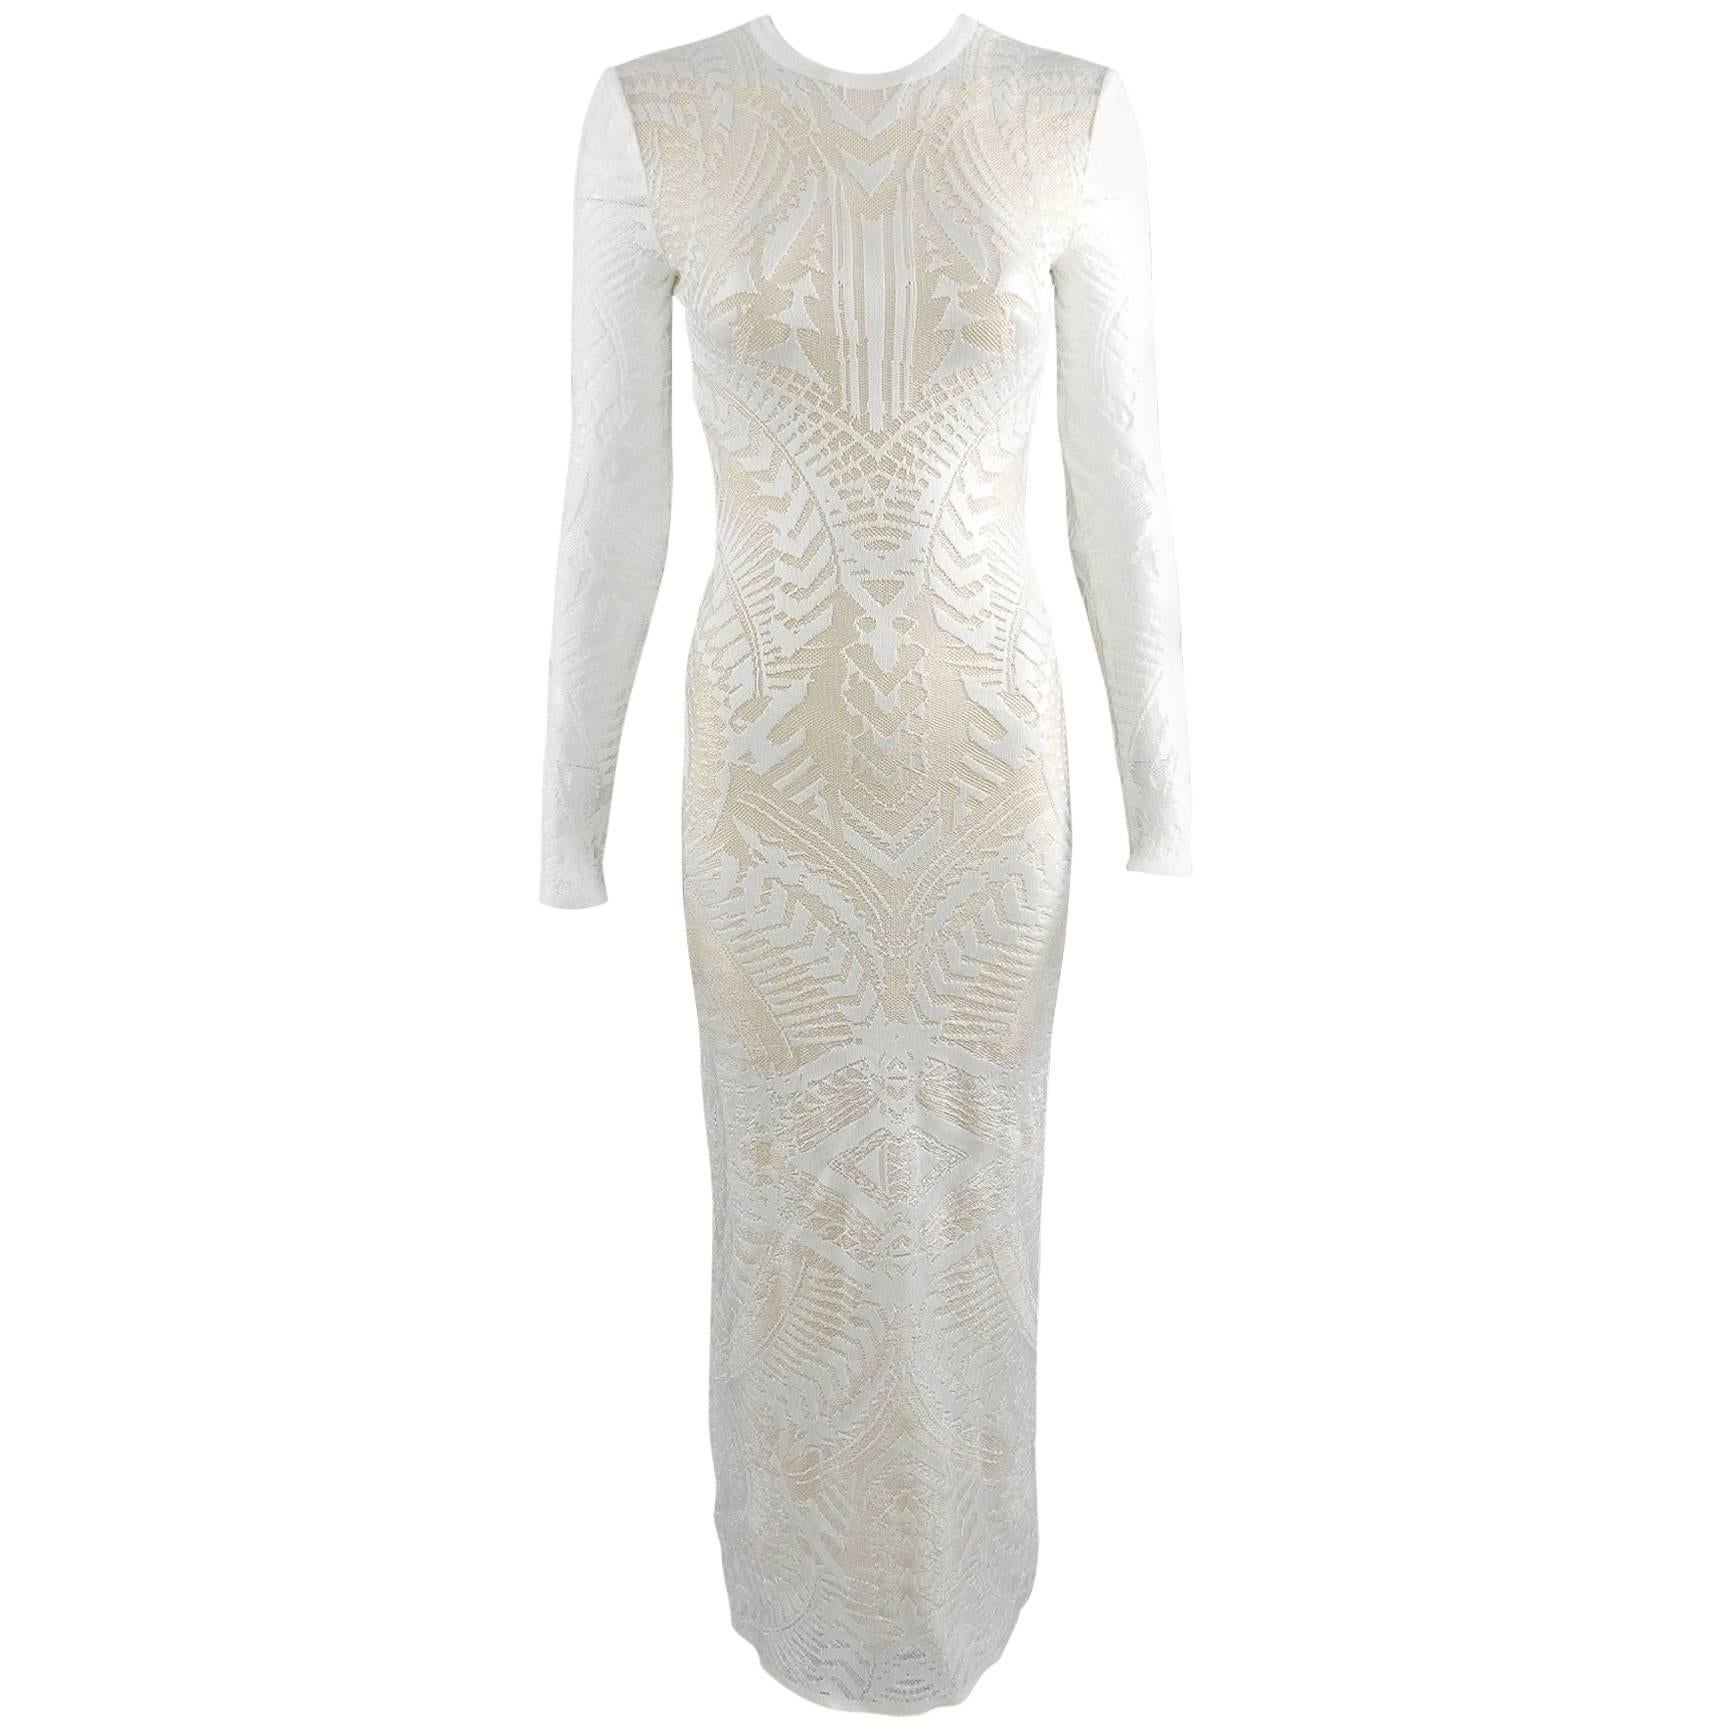 Balmain Long White Lace Stretch Dress with Nude Lining